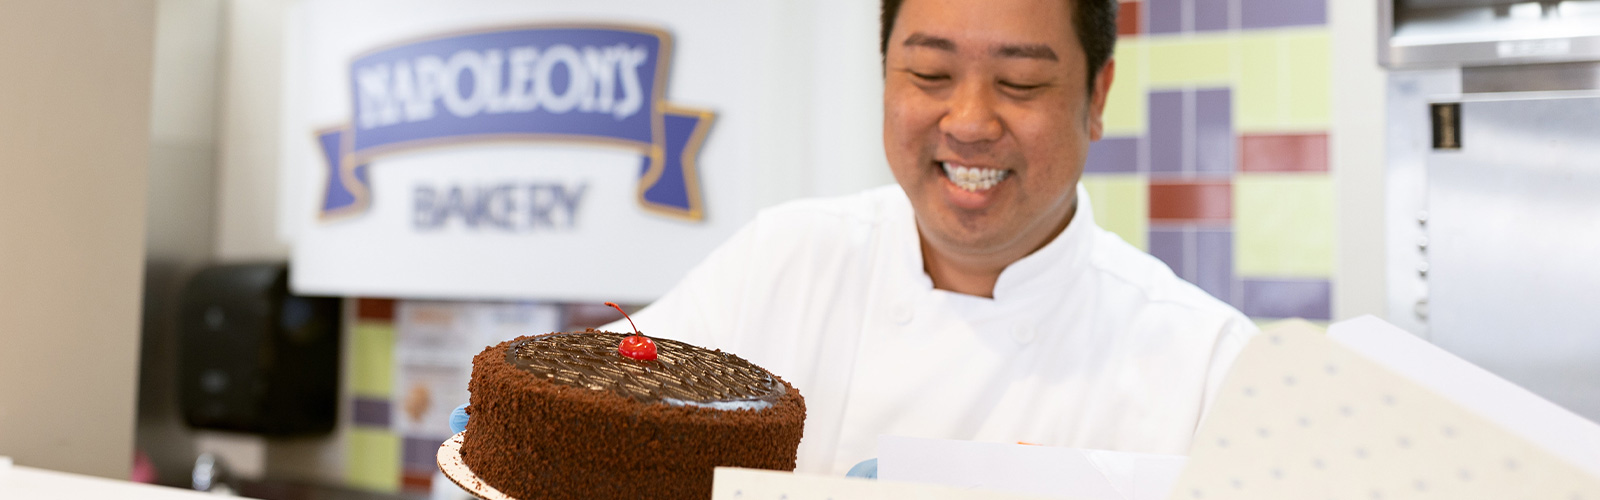 pastry chef from Napoleon's Bakery boxing a cake